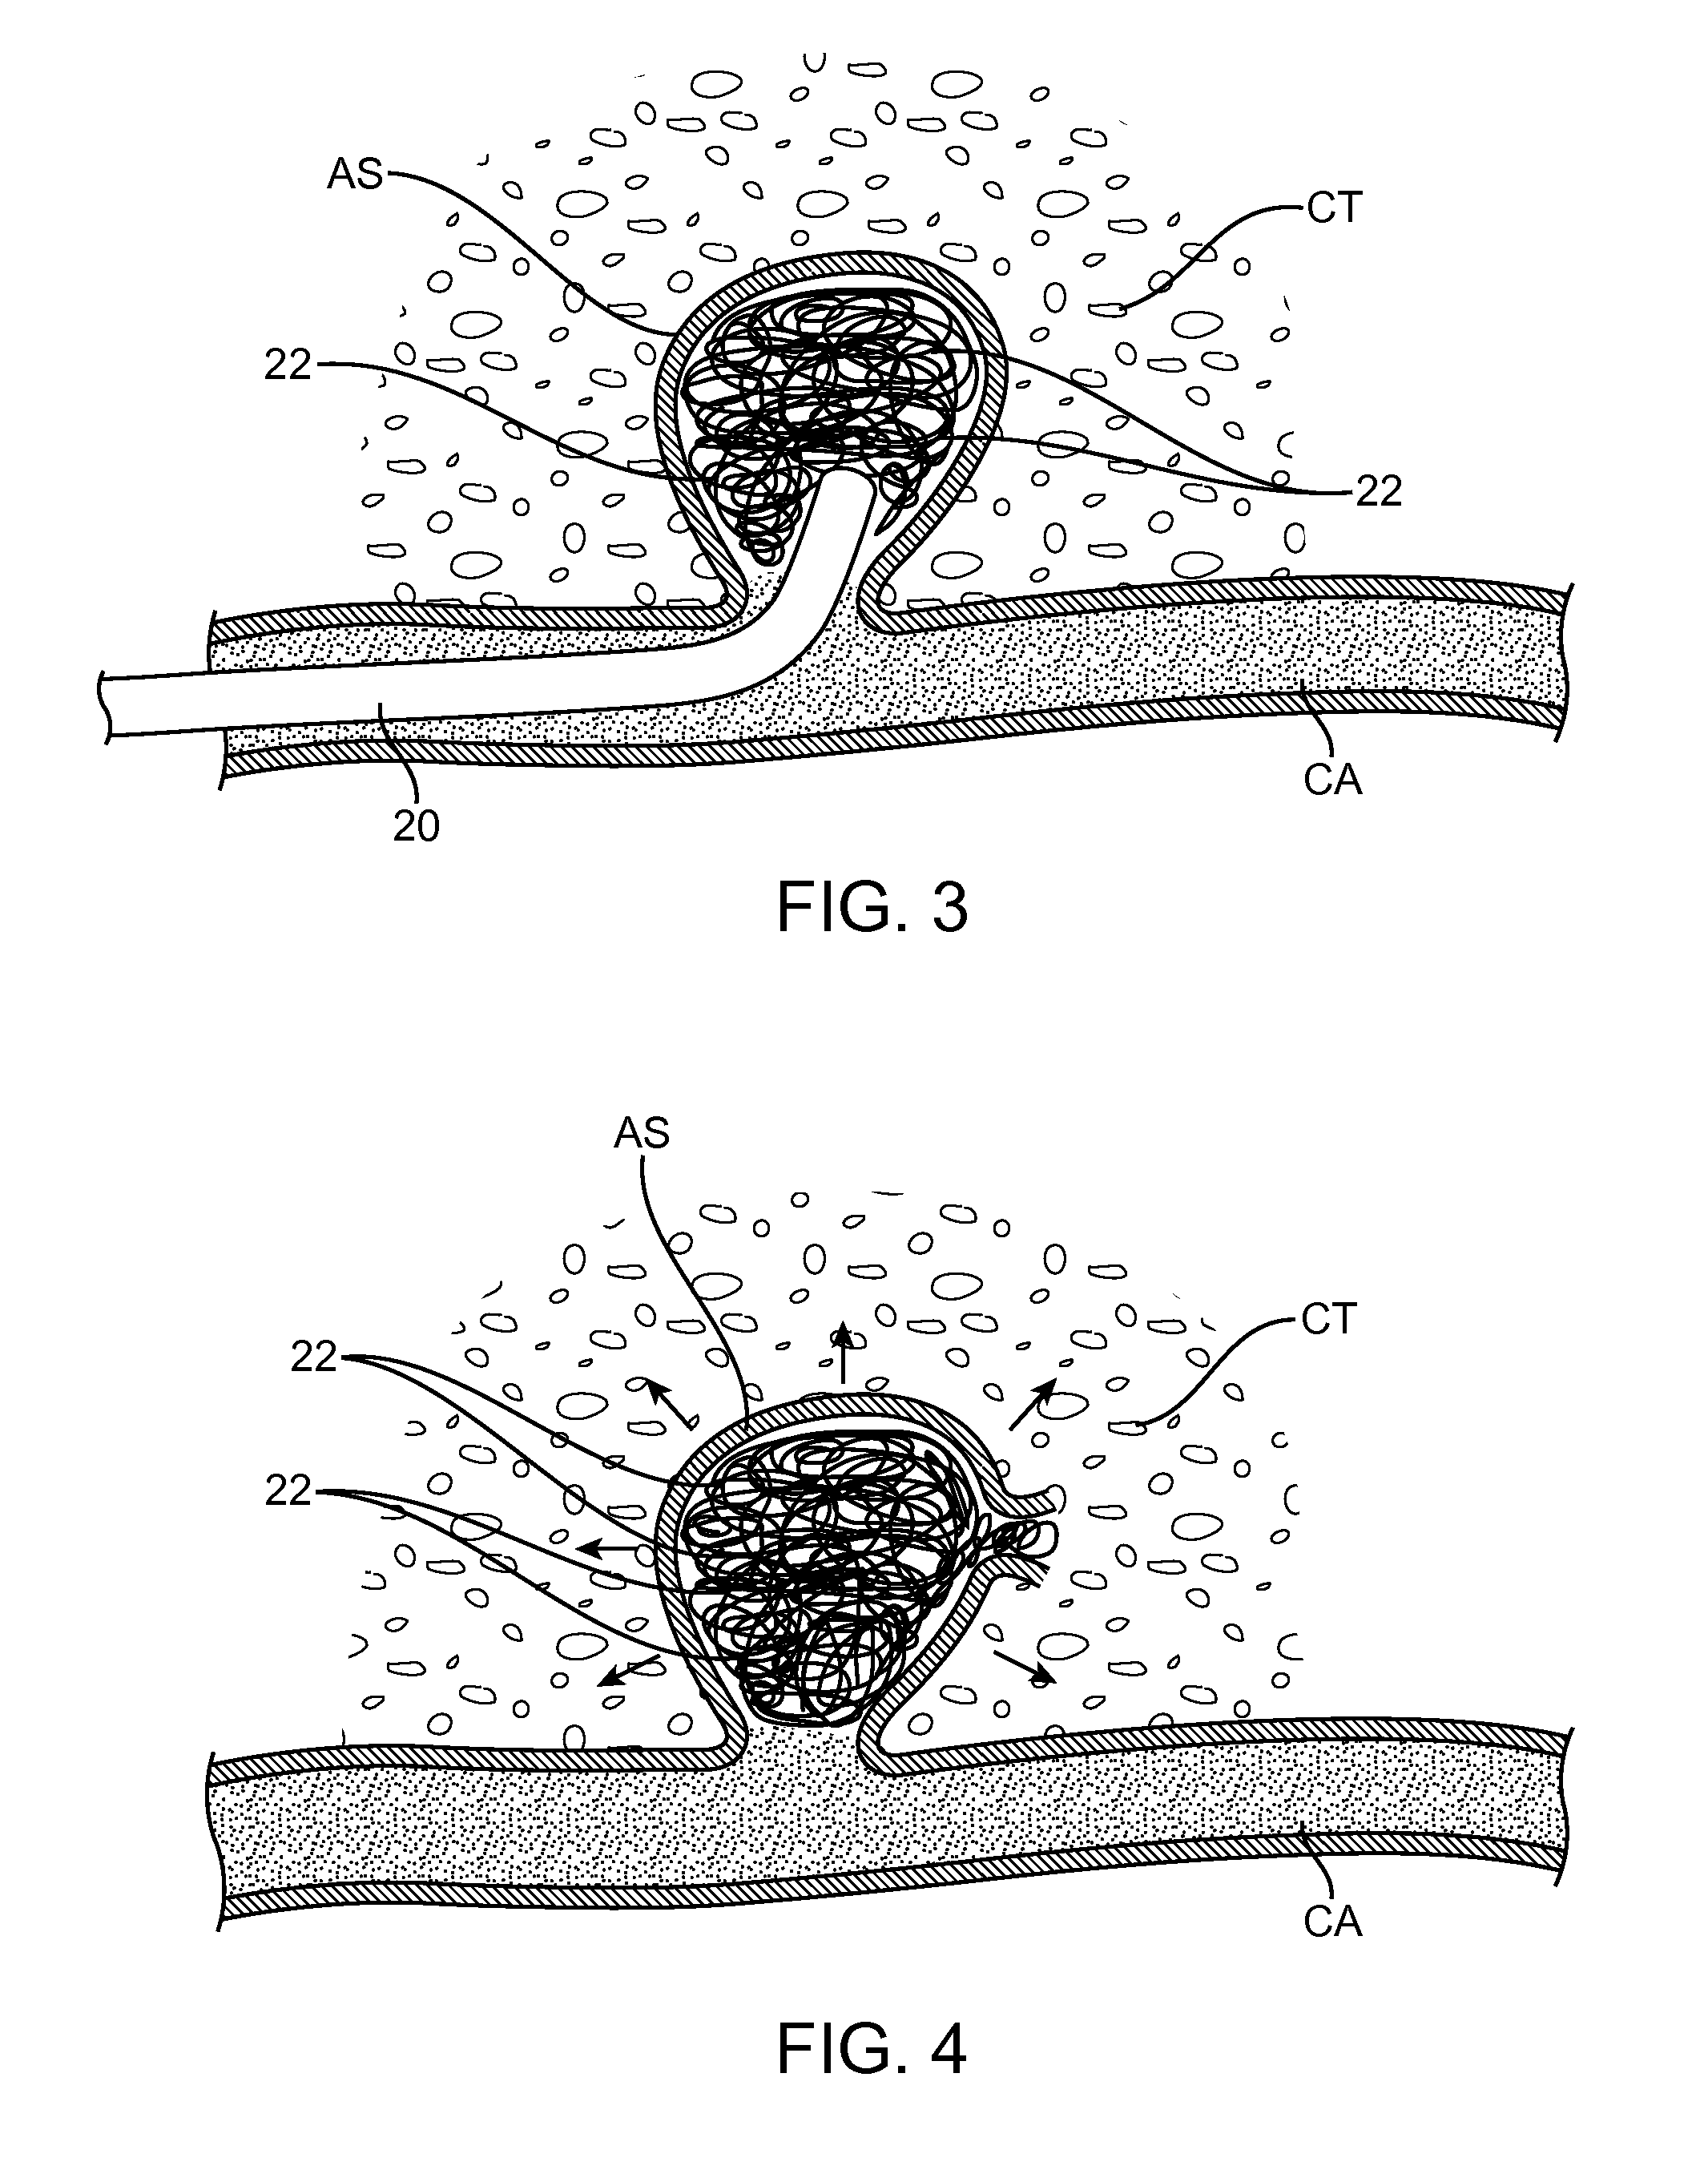 System and method for treatment of hemorrhagic stroke